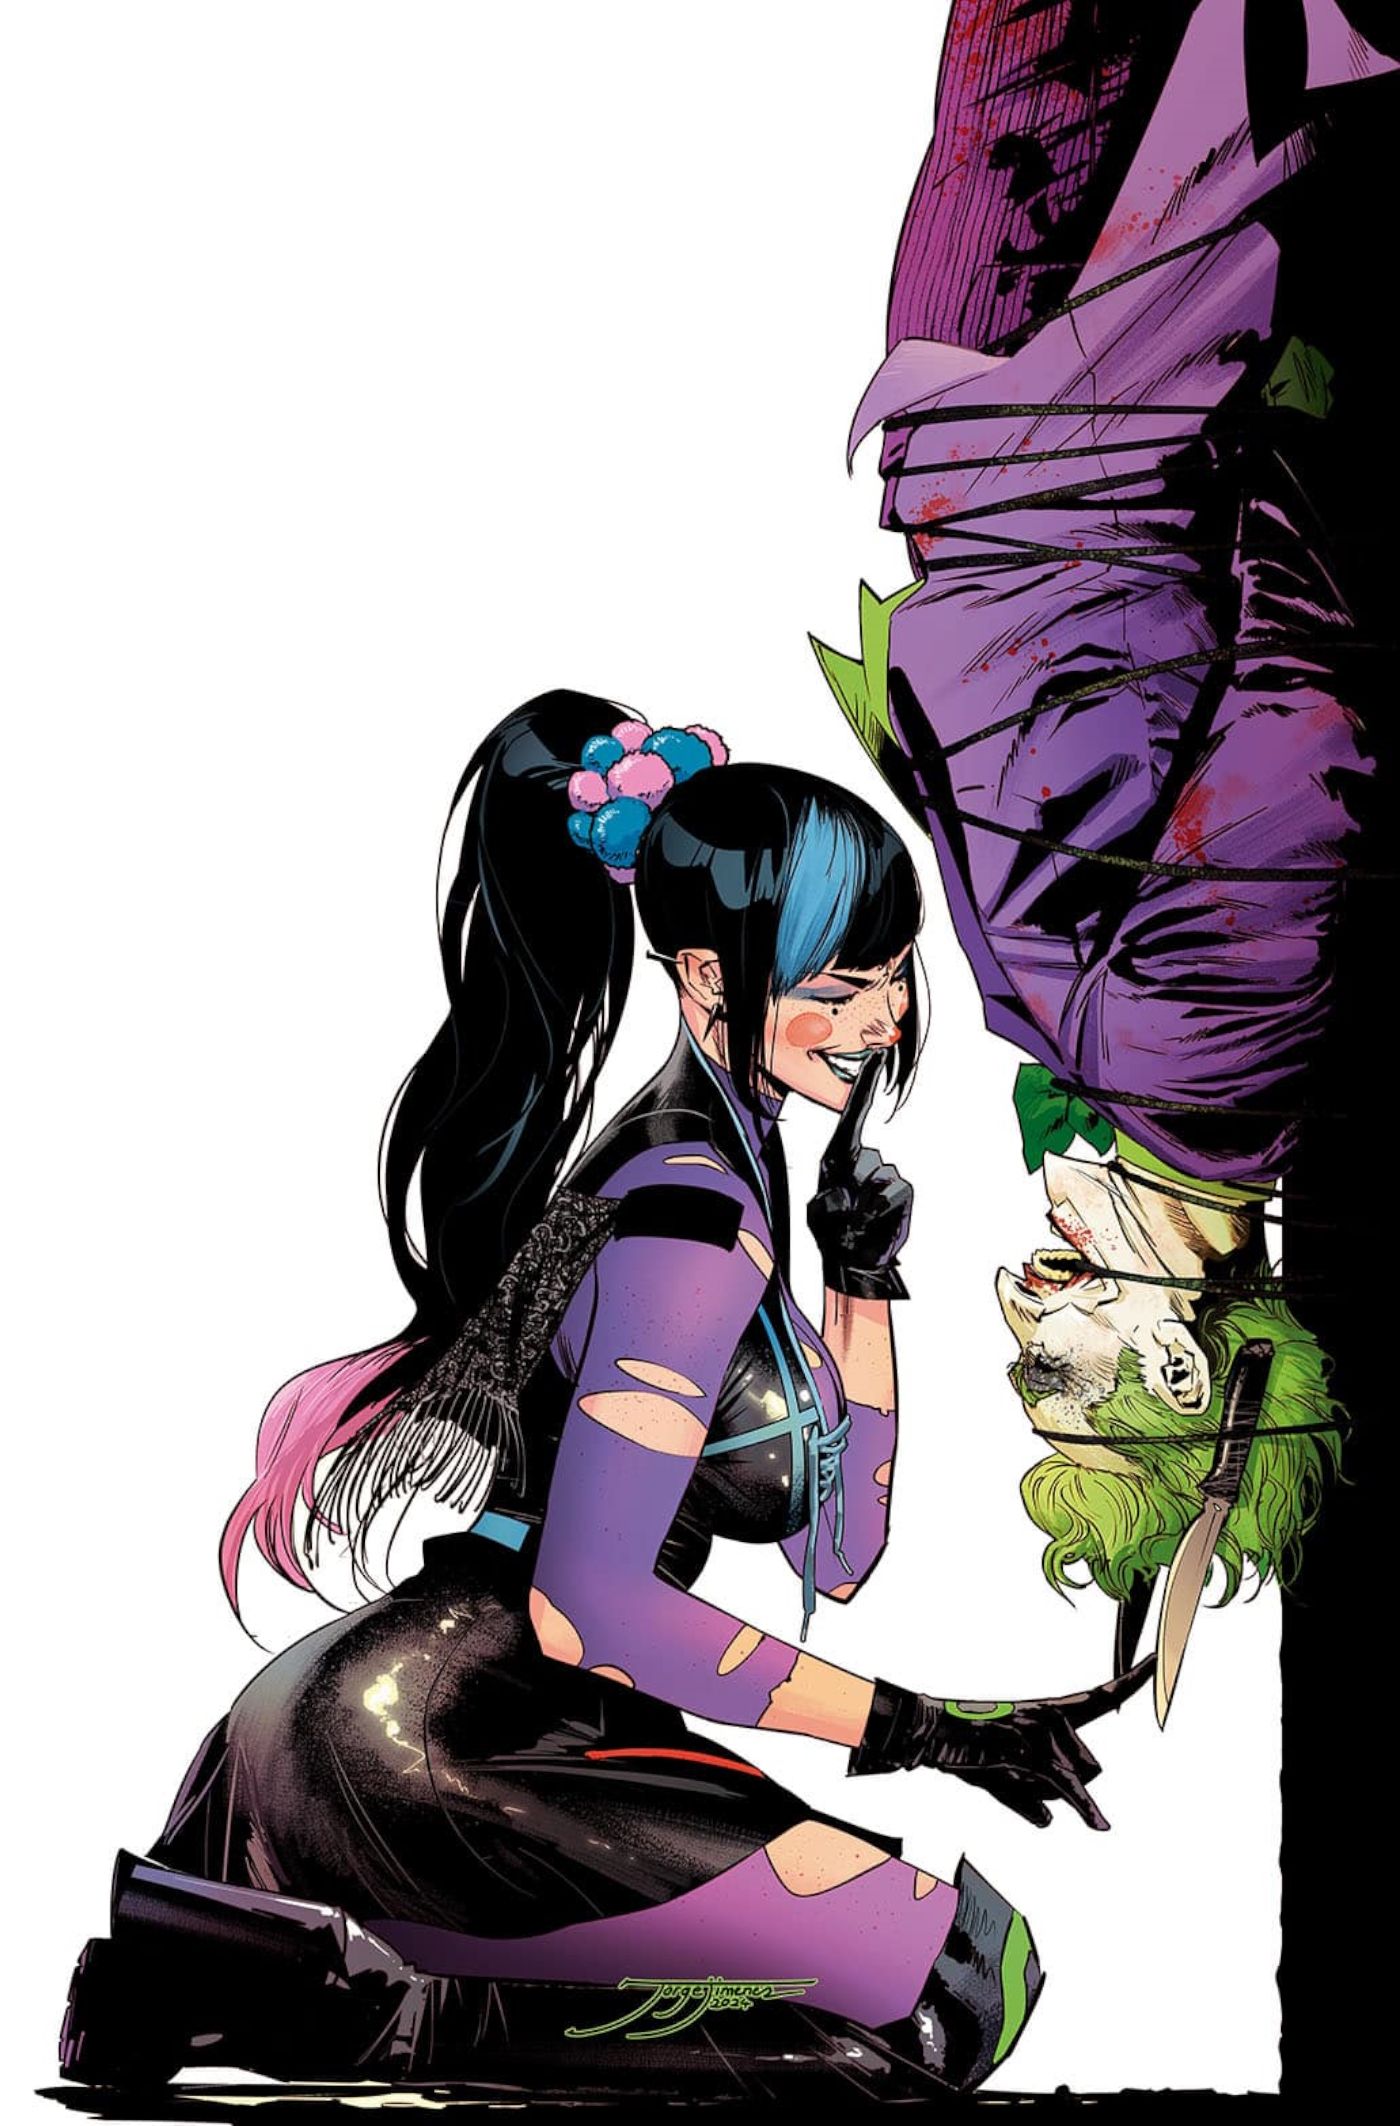 Joker’s Girlfriend Takes Their Relationship to Dangerous Heights in New Cover